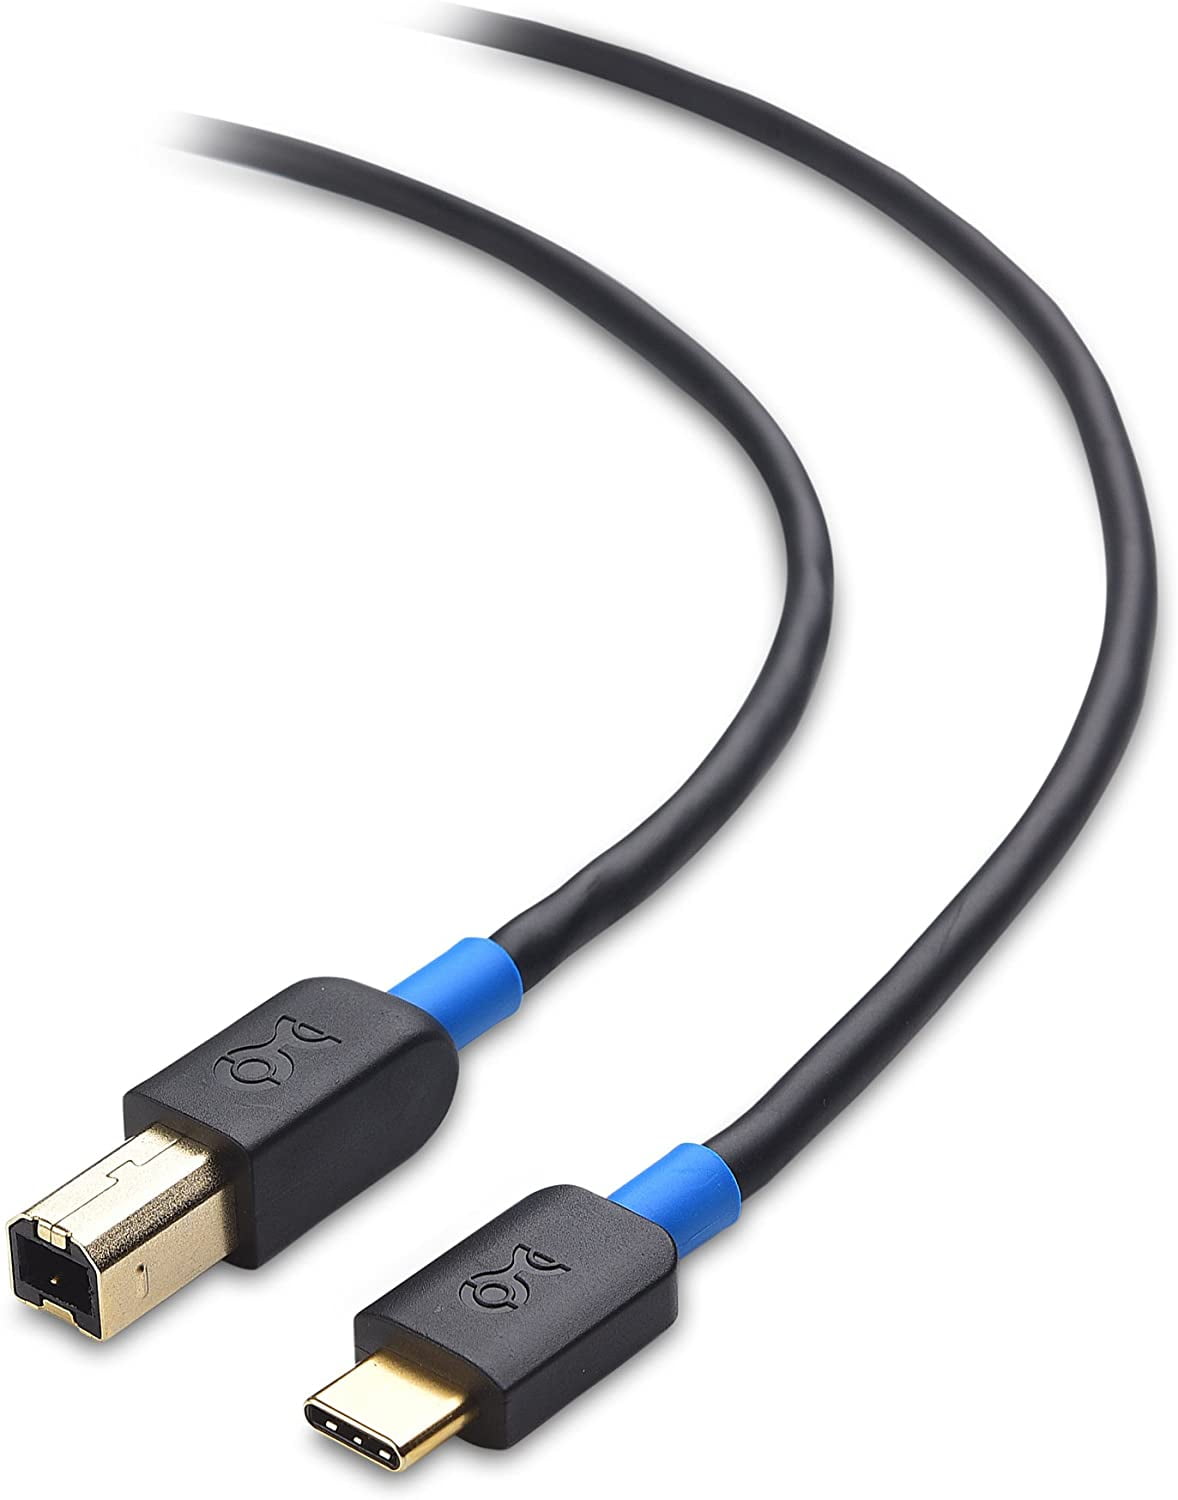 Deleycon USB C to Hard Drive Cable 1-metre